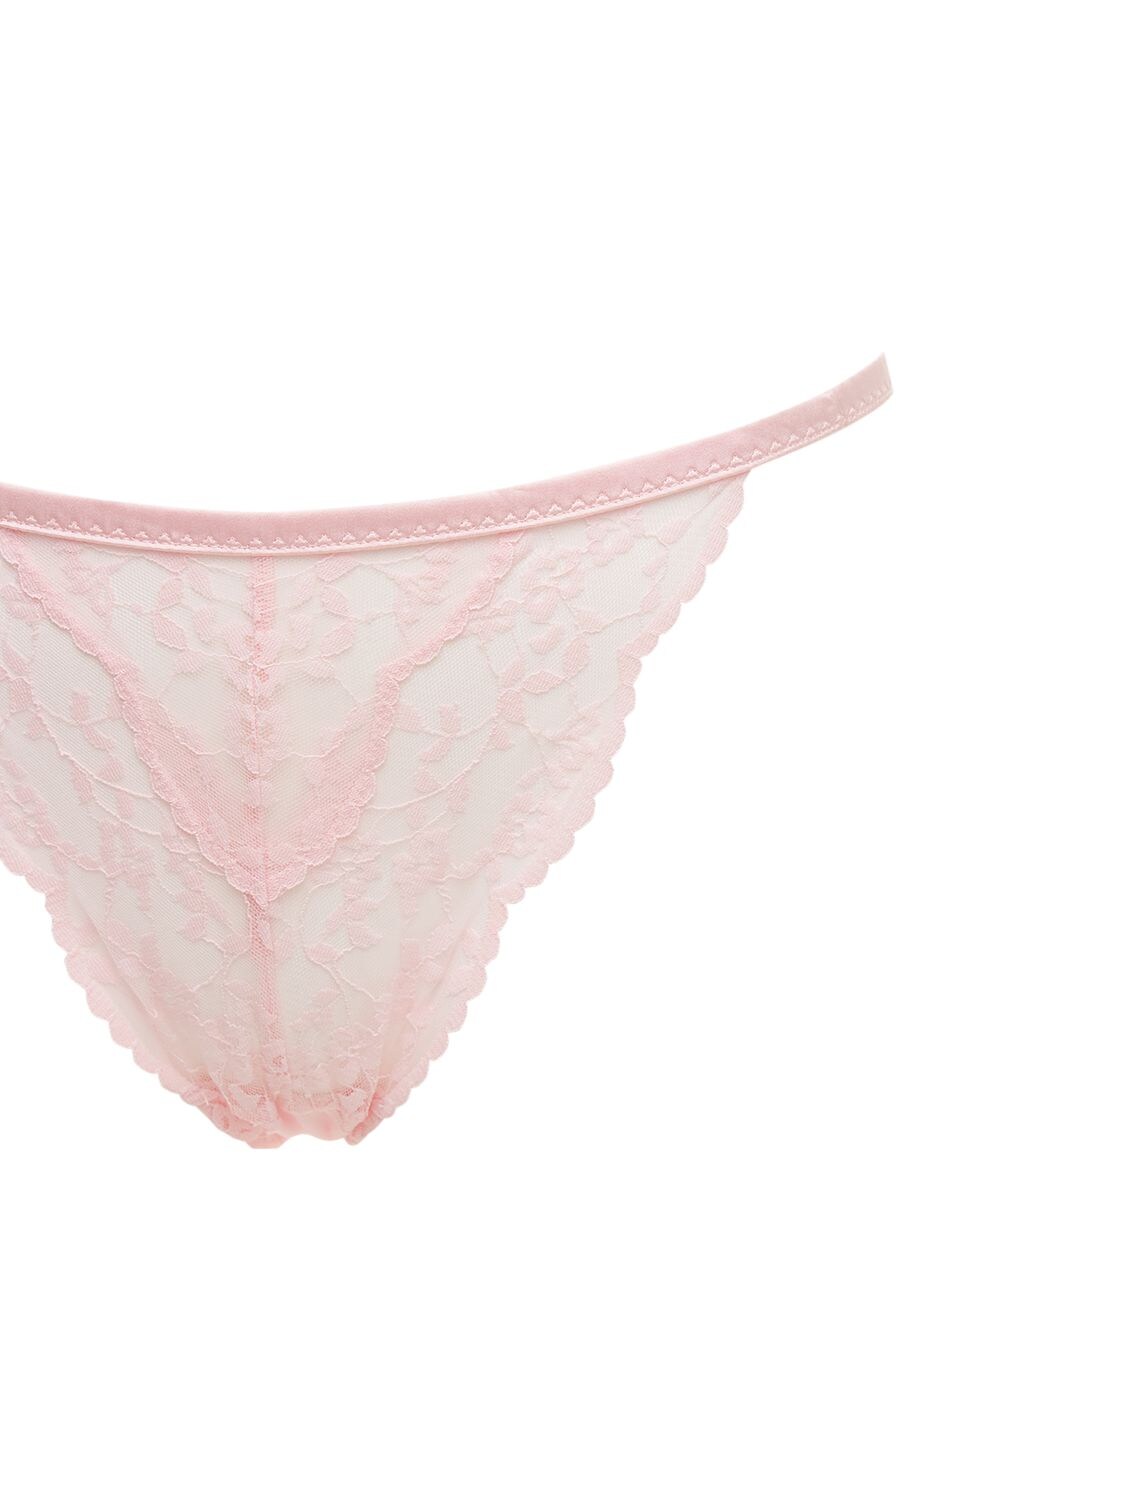 Stella McCartney Clementine Glancing Lace Low Rise Thong